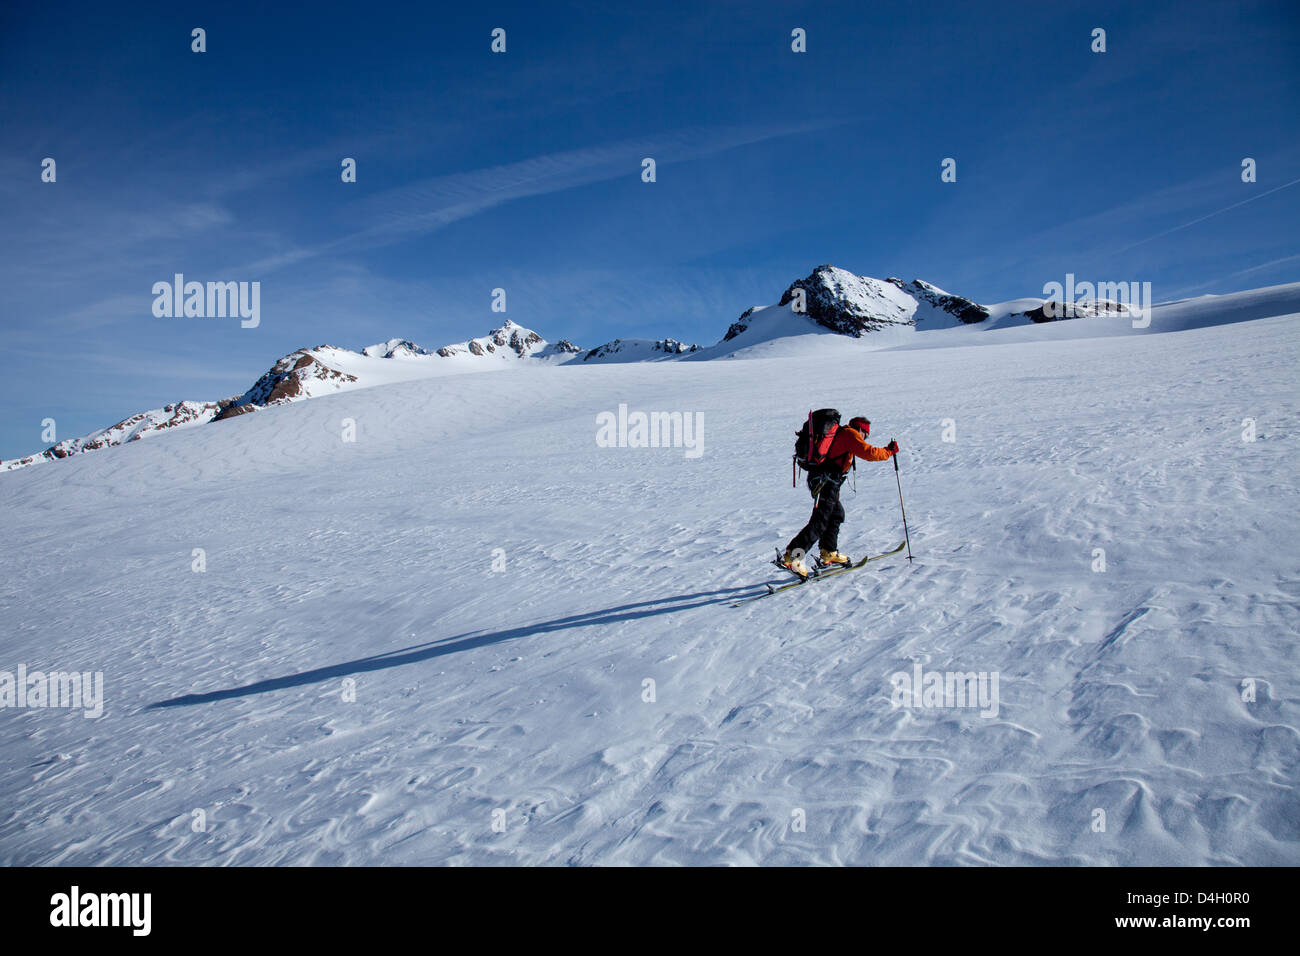 Ski touring in the Alps, ascent to Punta San Matteo, on the border of Lombardia and Trentino-Alto Adige, Italy Stock Photo